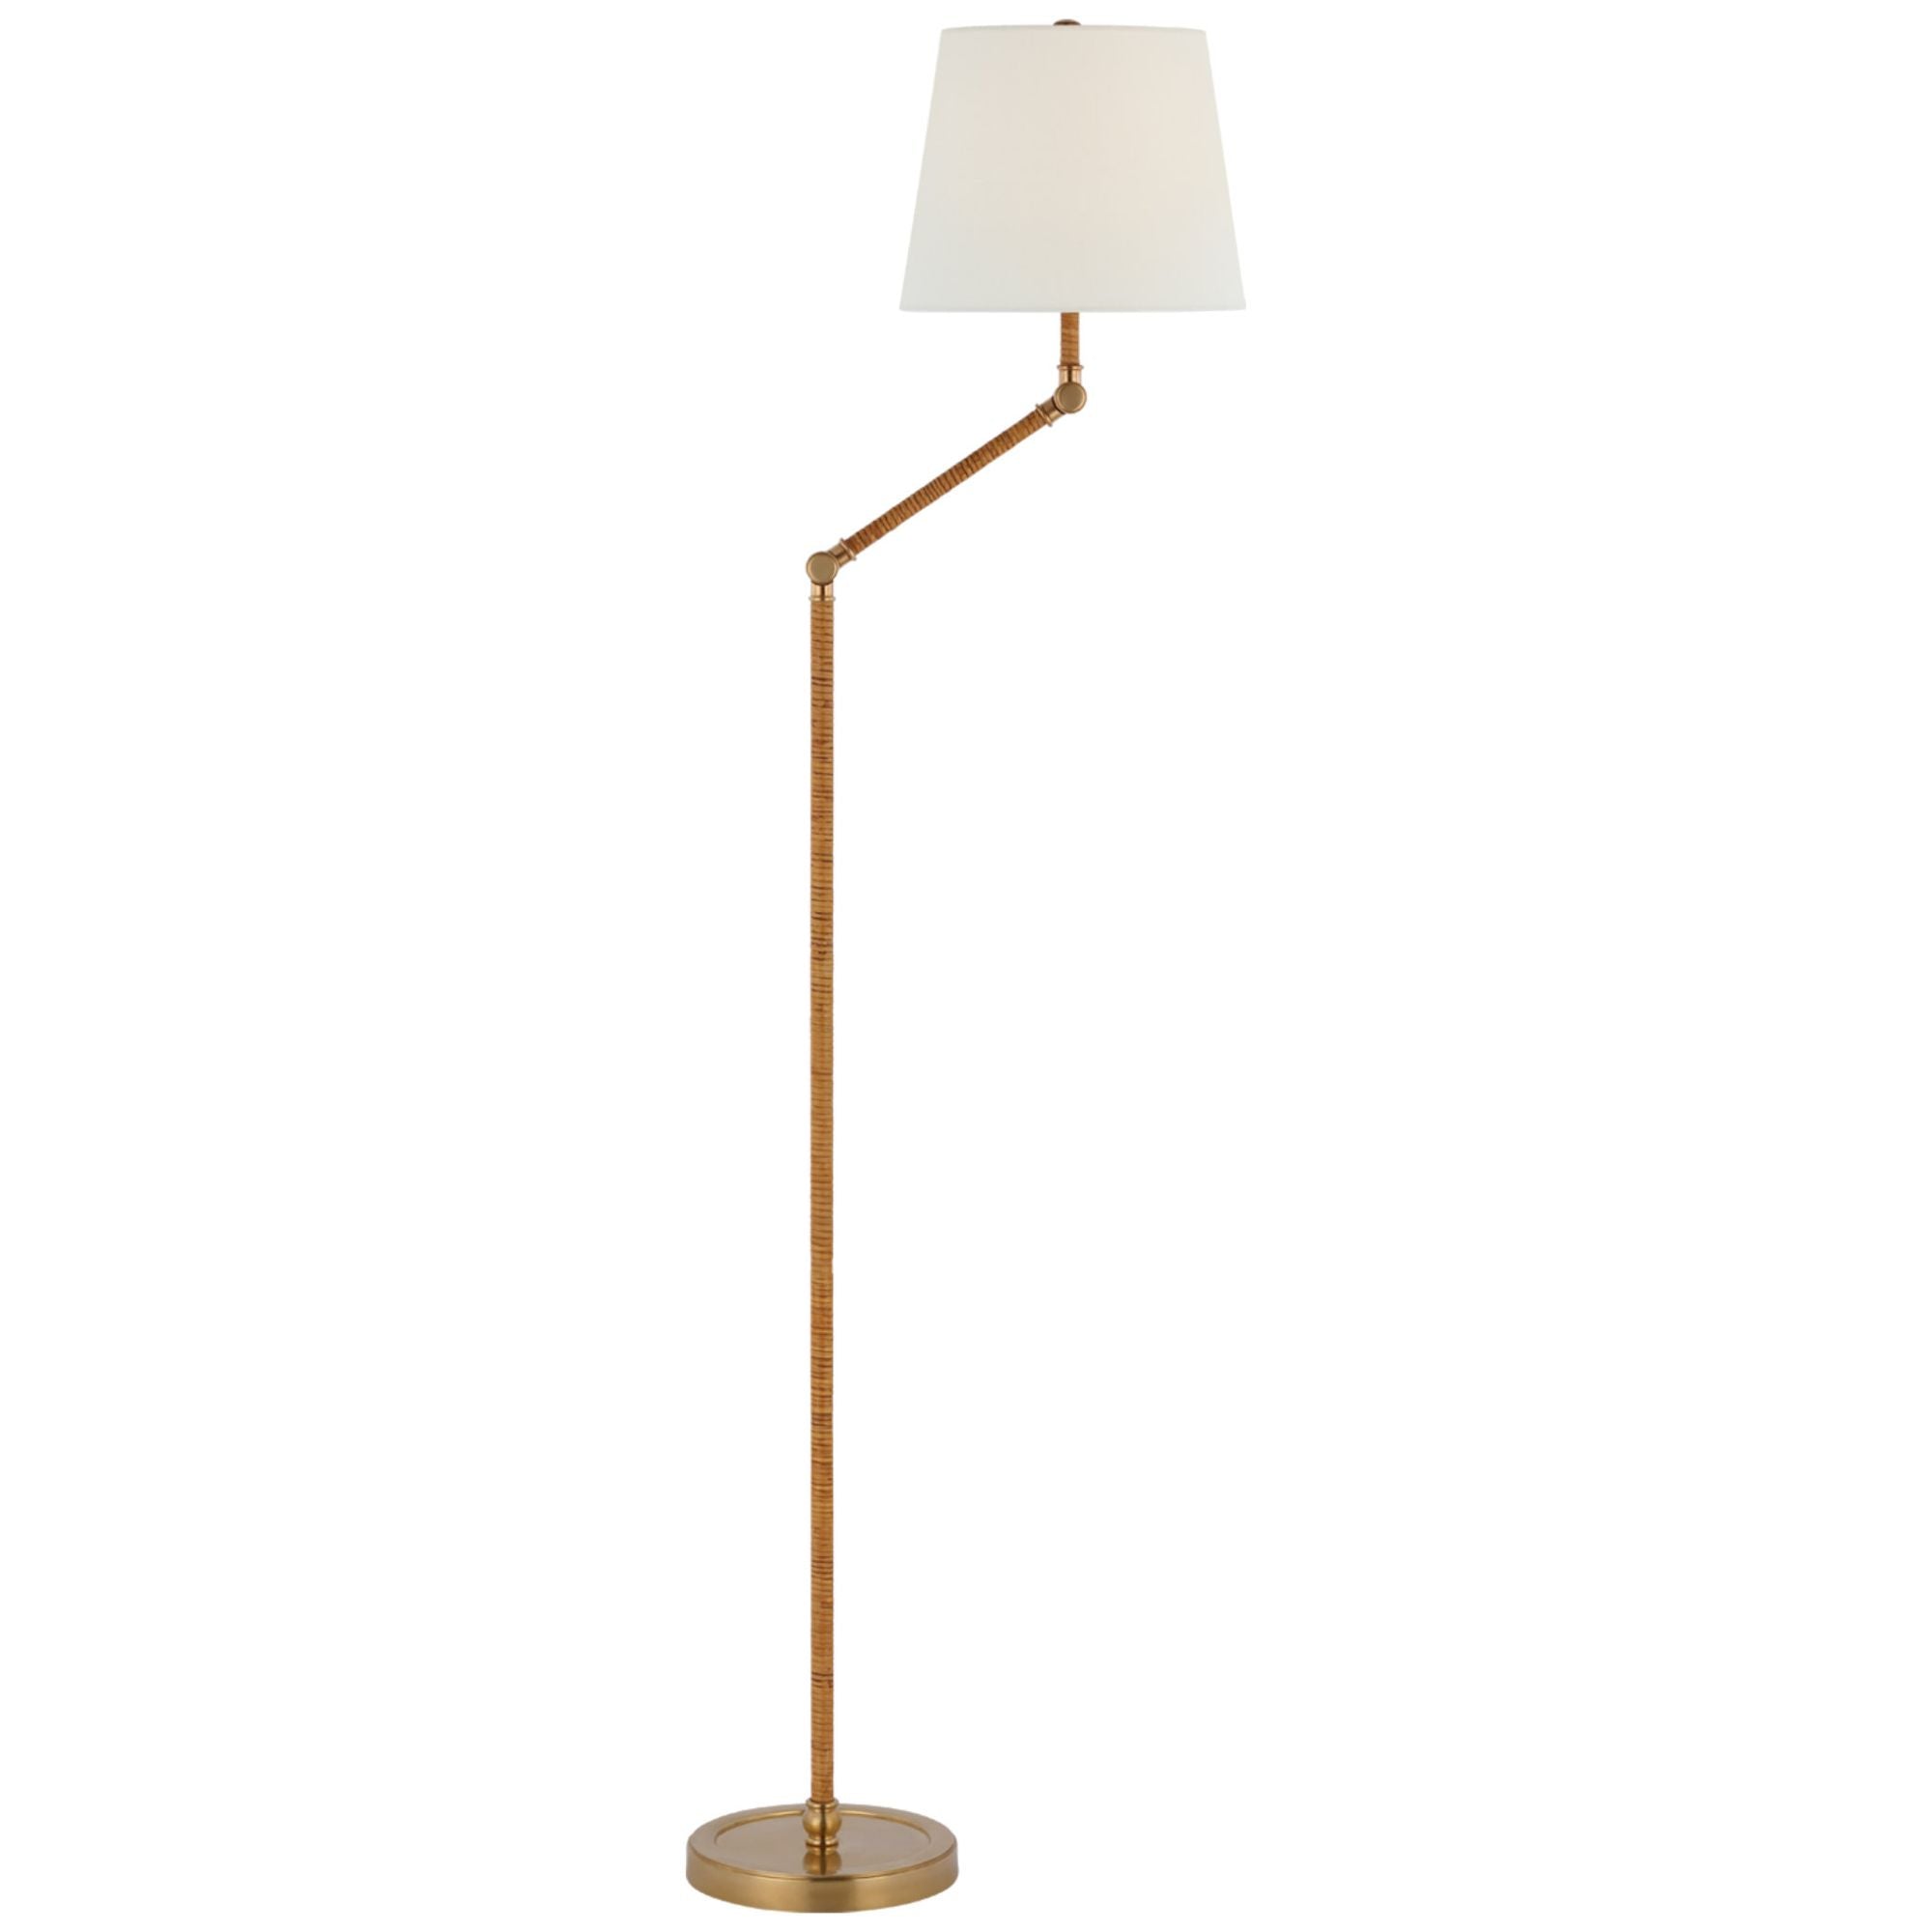 Chapman & Myers Ring Form Small Table Lamp in Antique-Burnished Brass